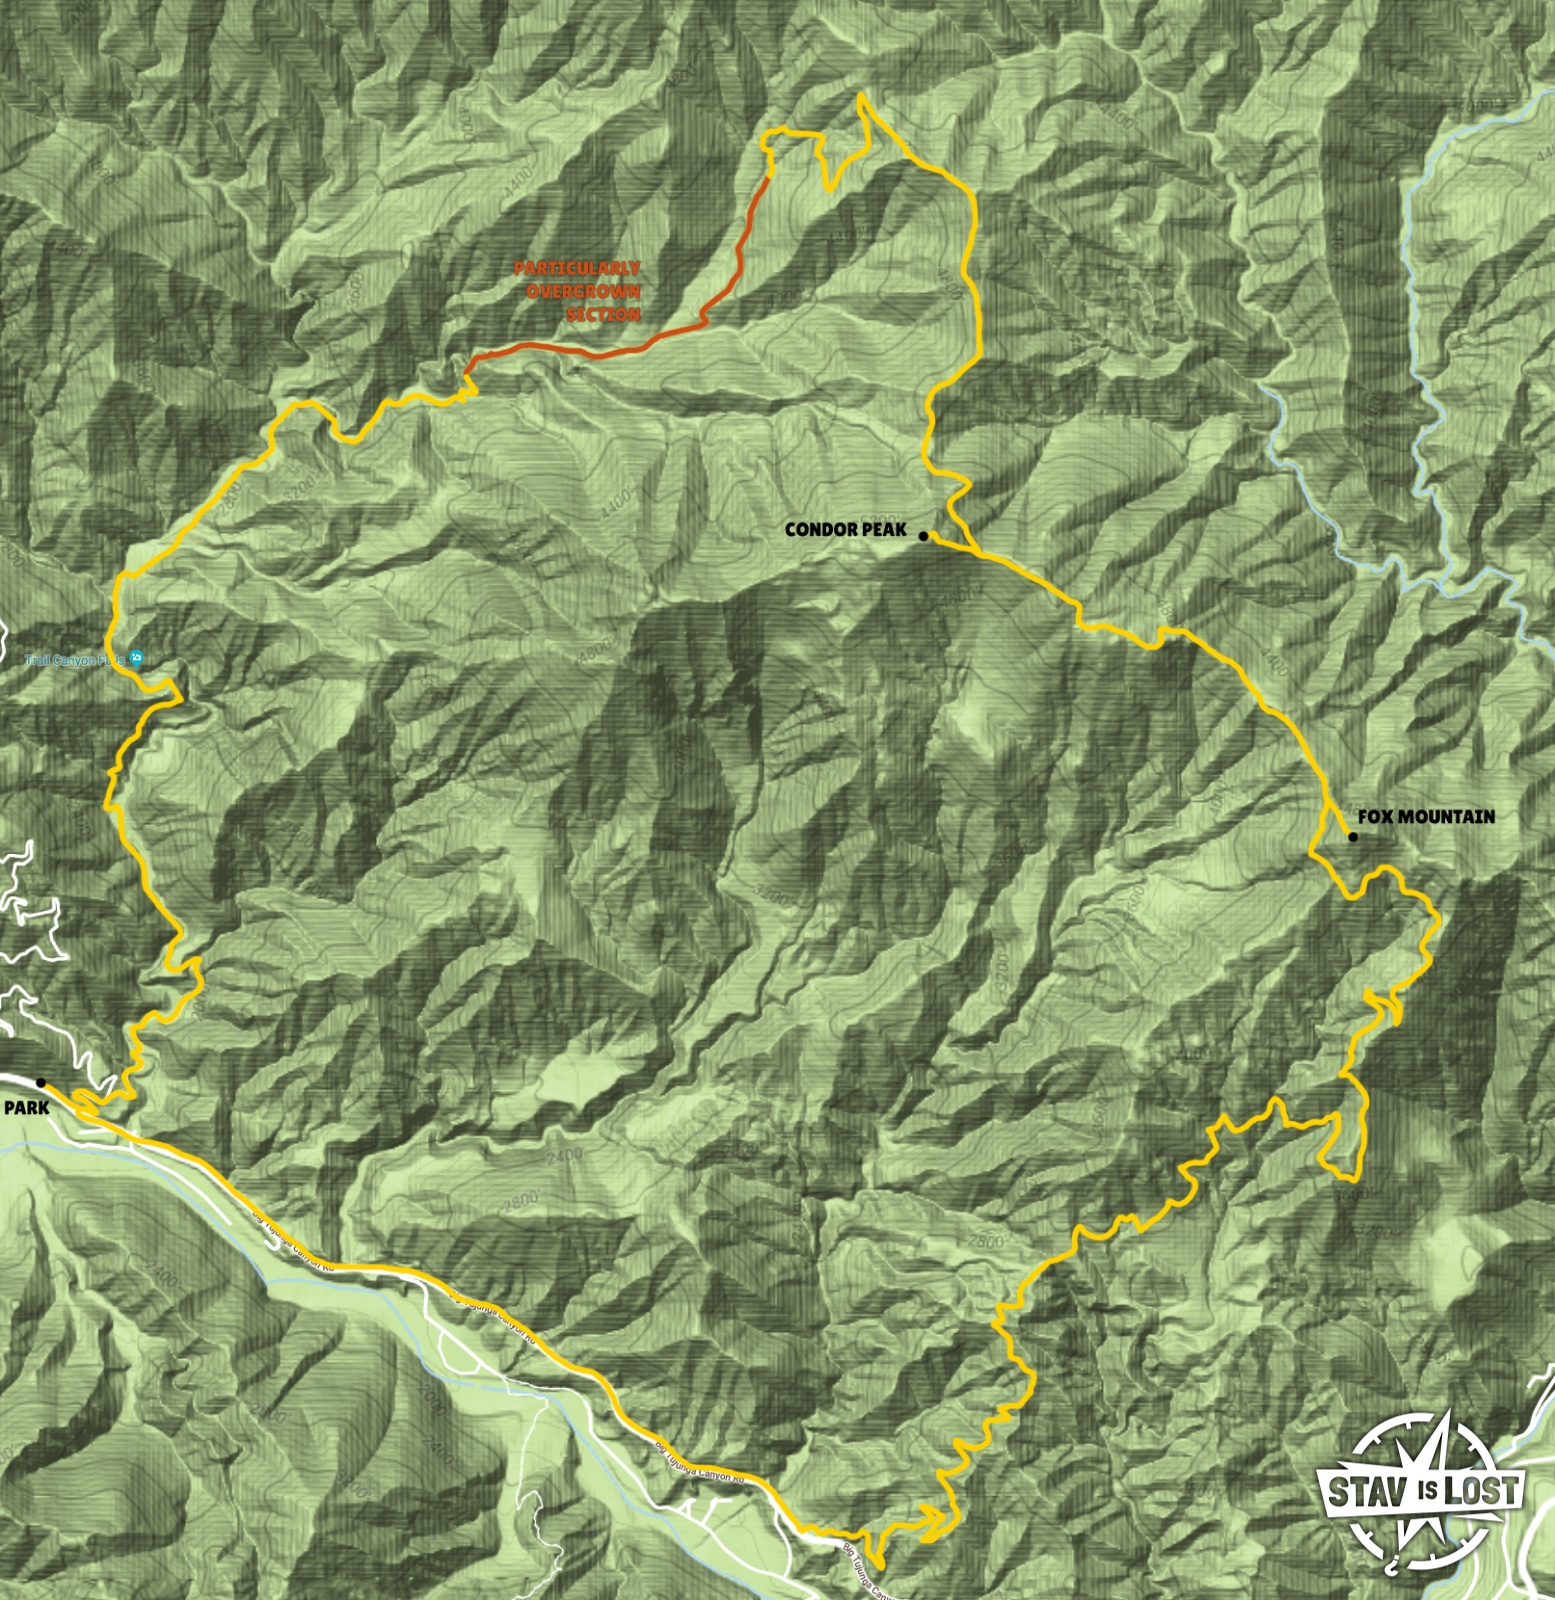 map for Condor Peak and Fox Mountain via Trail Canyon Loop by stav is lost